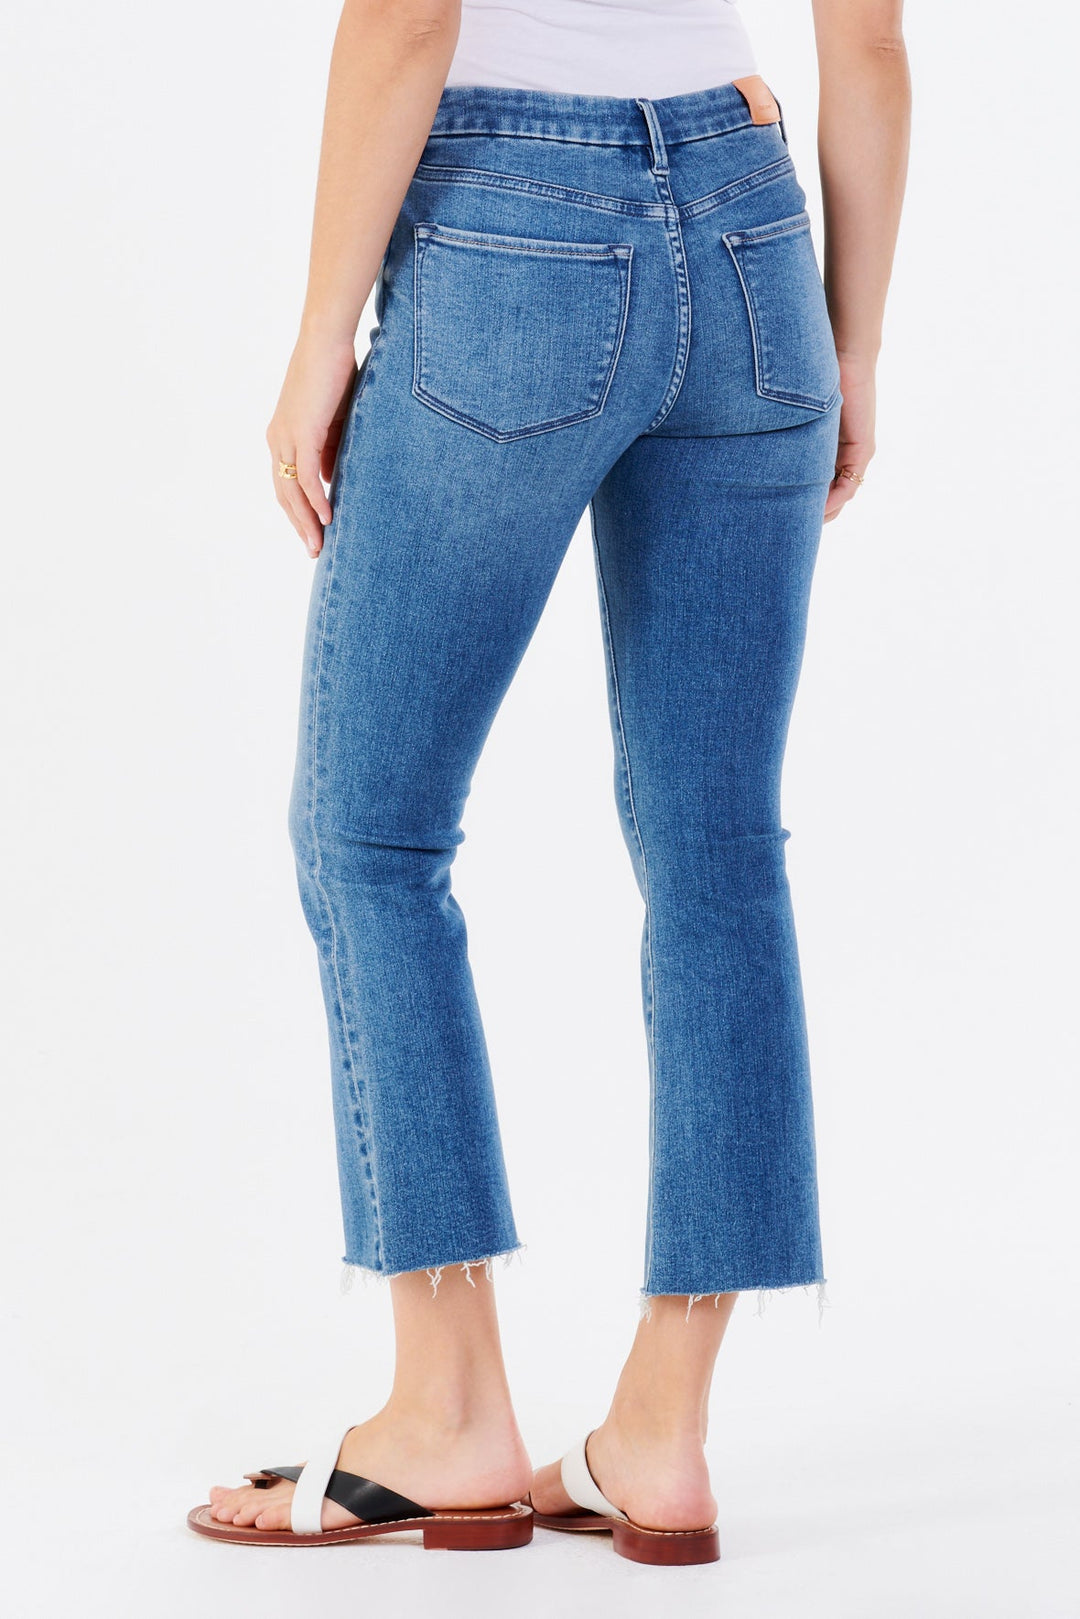 image of a female model wearing a JEANNE SUPER HIGH RISE CROPPED FLARE JEANS ESCAPE JEANS